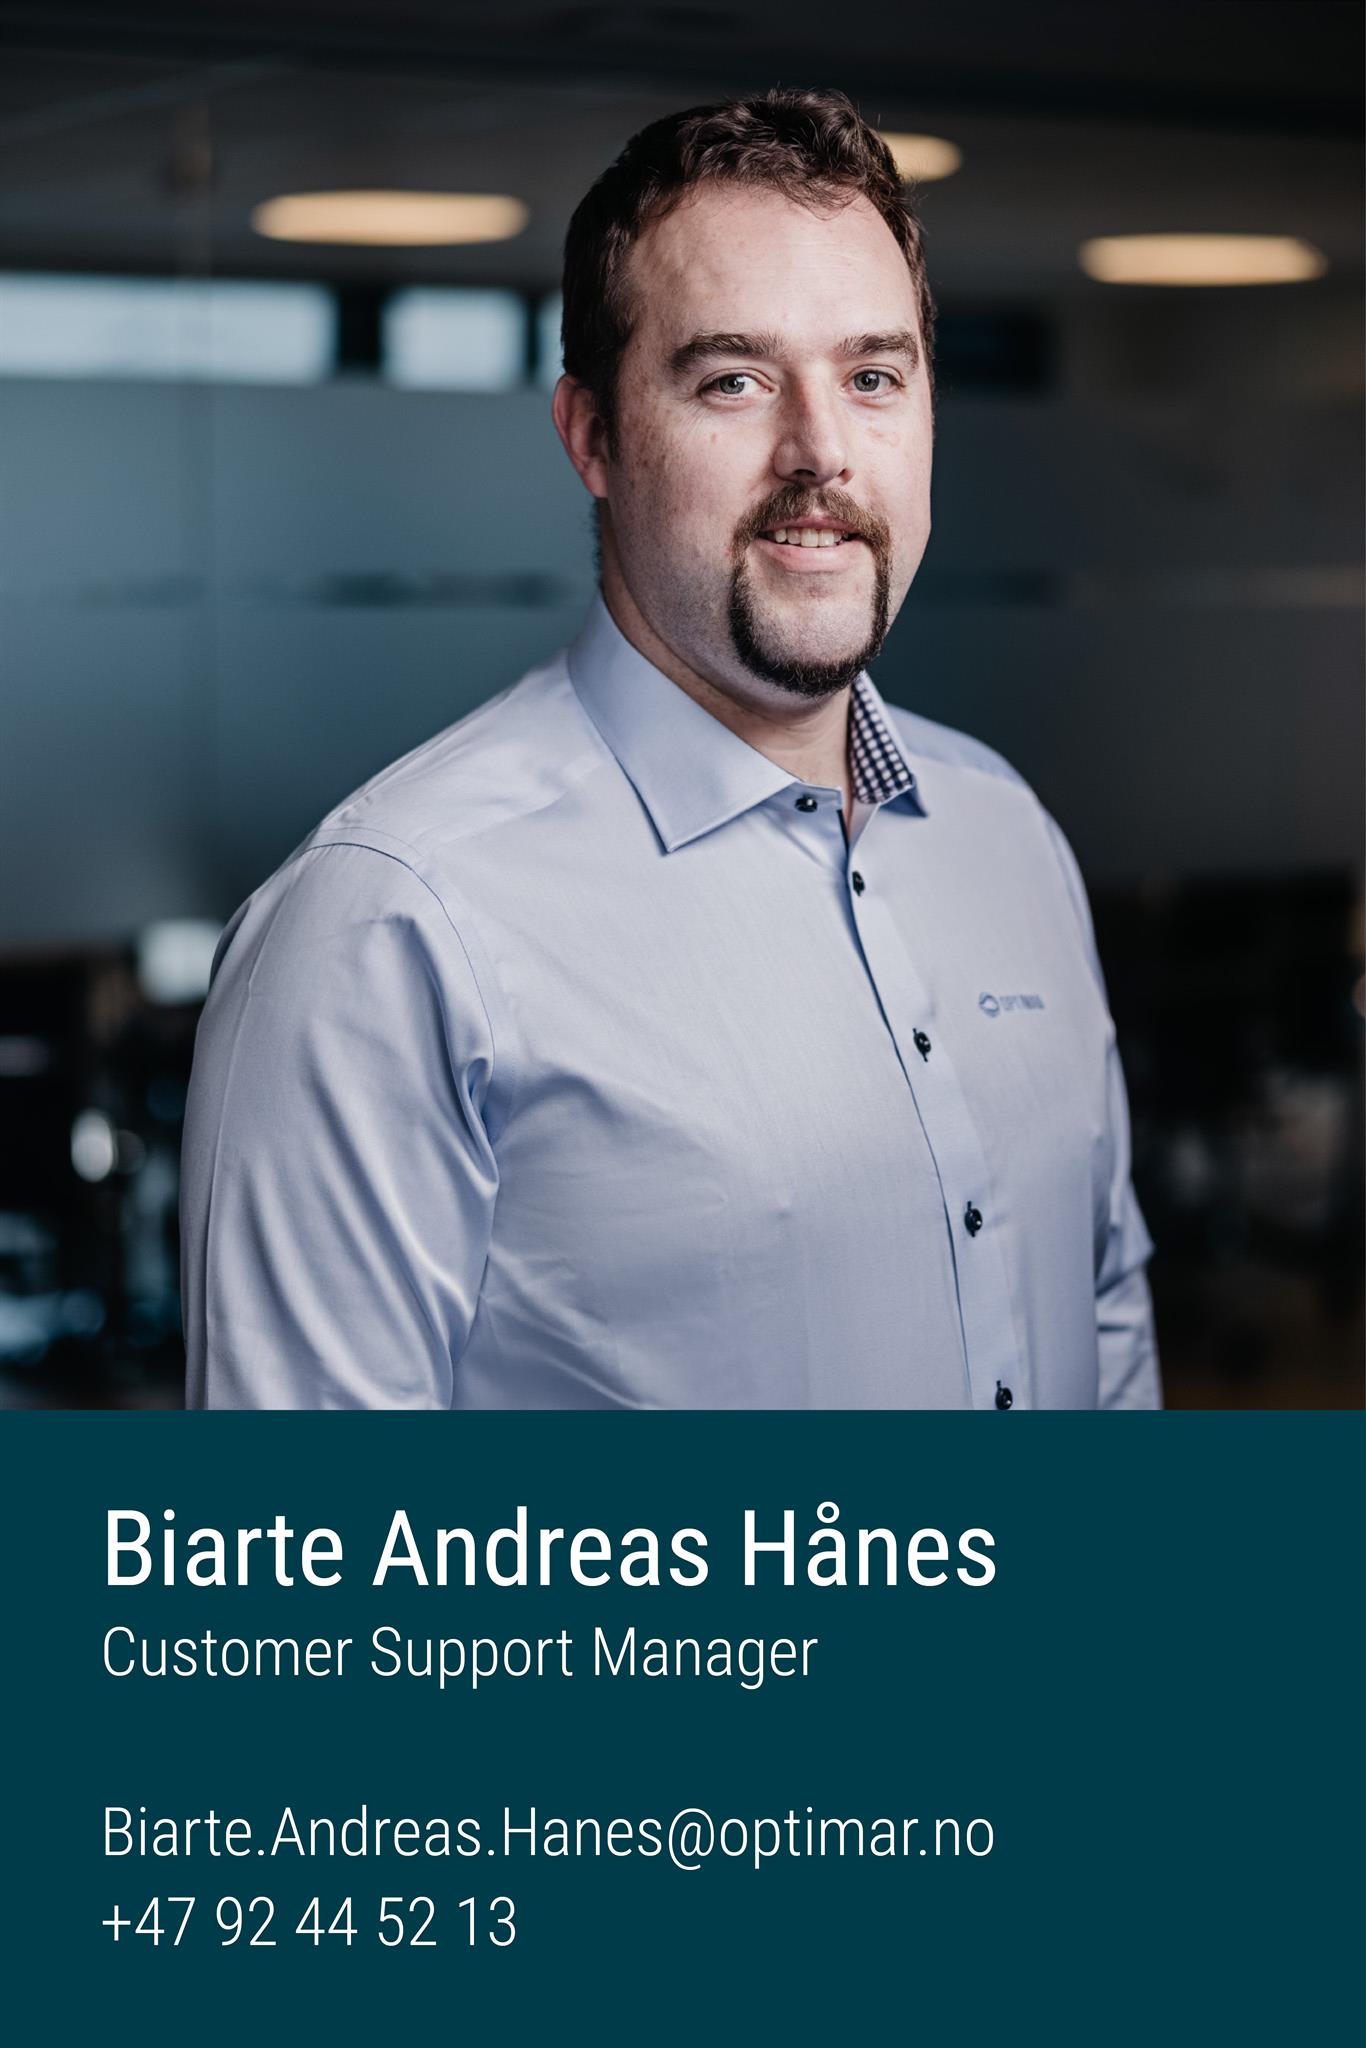 Biarte Andreas Hånes